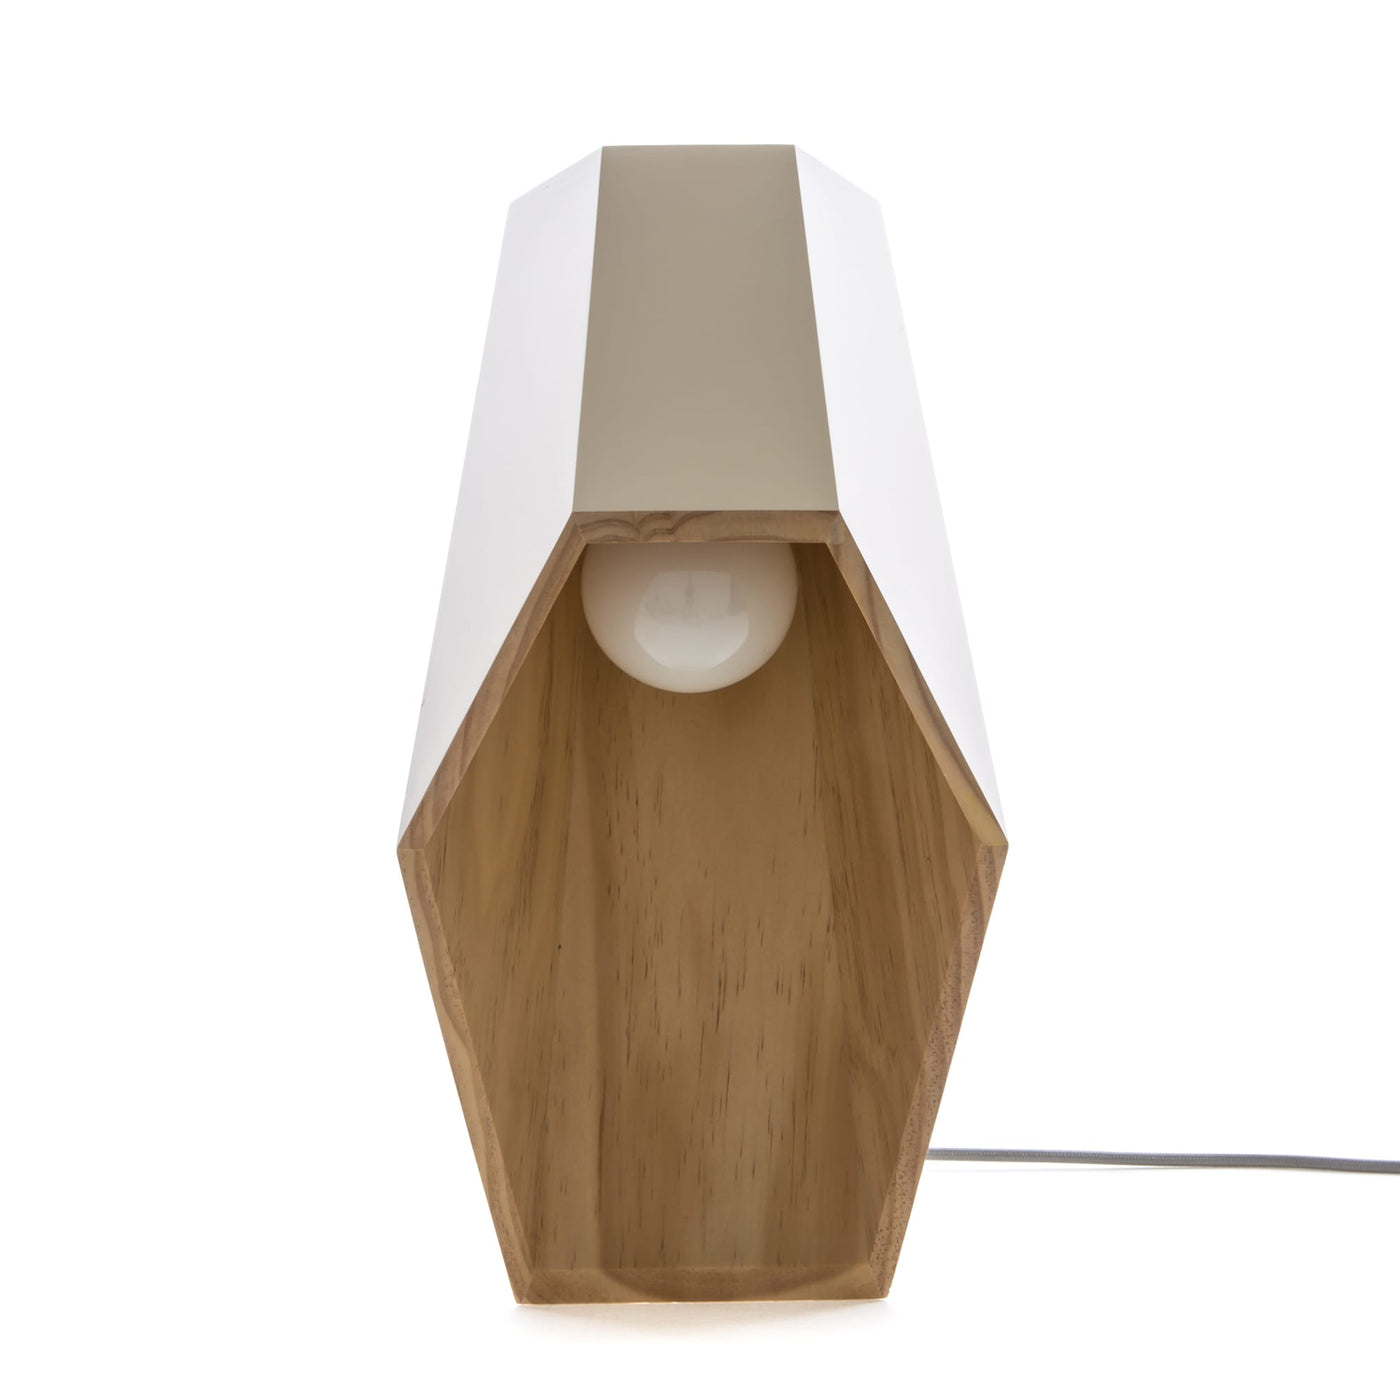 WOODSPOT Wooden Table Lamp - White